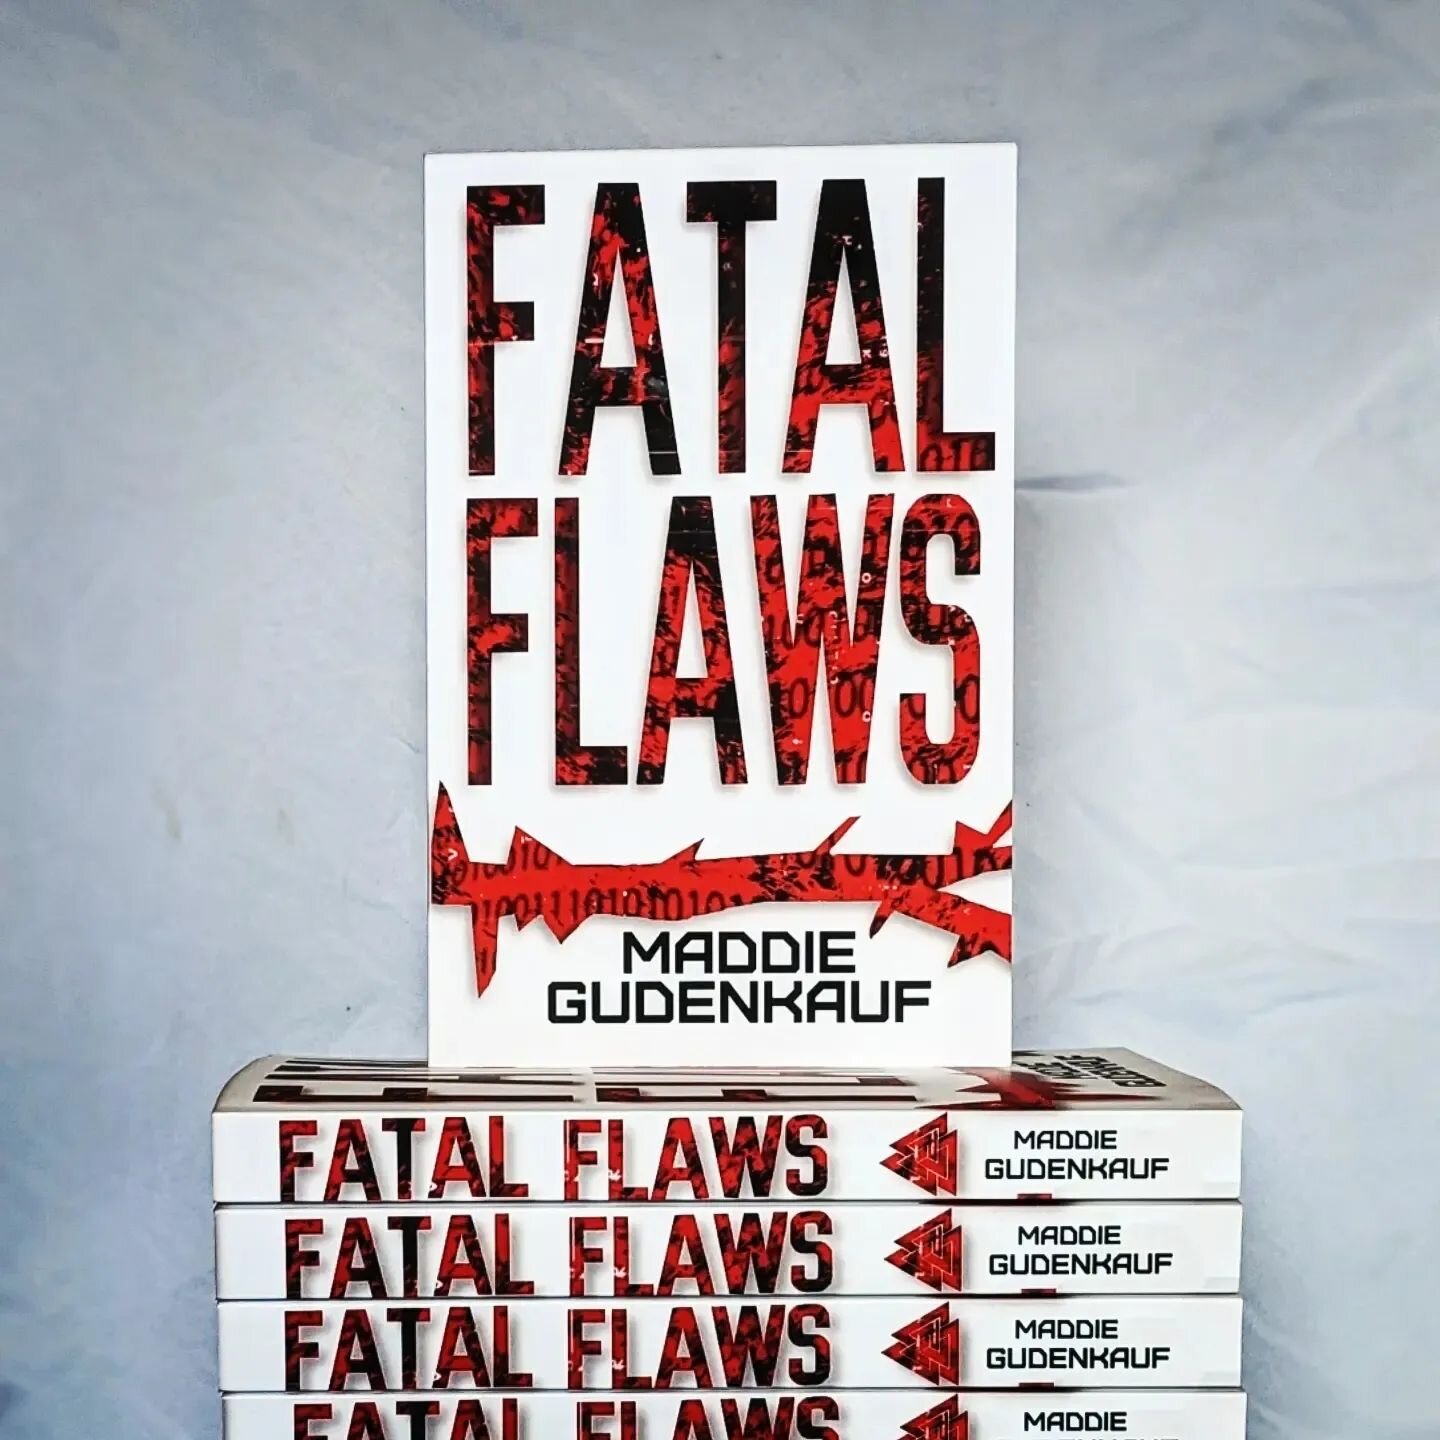 Only 20 more days until Fatal Flaws is released to the world! Have you pre-ordered your copy through Crowded Bookshelf yet? It works just like ordering books online and they can ship the book anywhere you're ordering from! But if you order through Cr